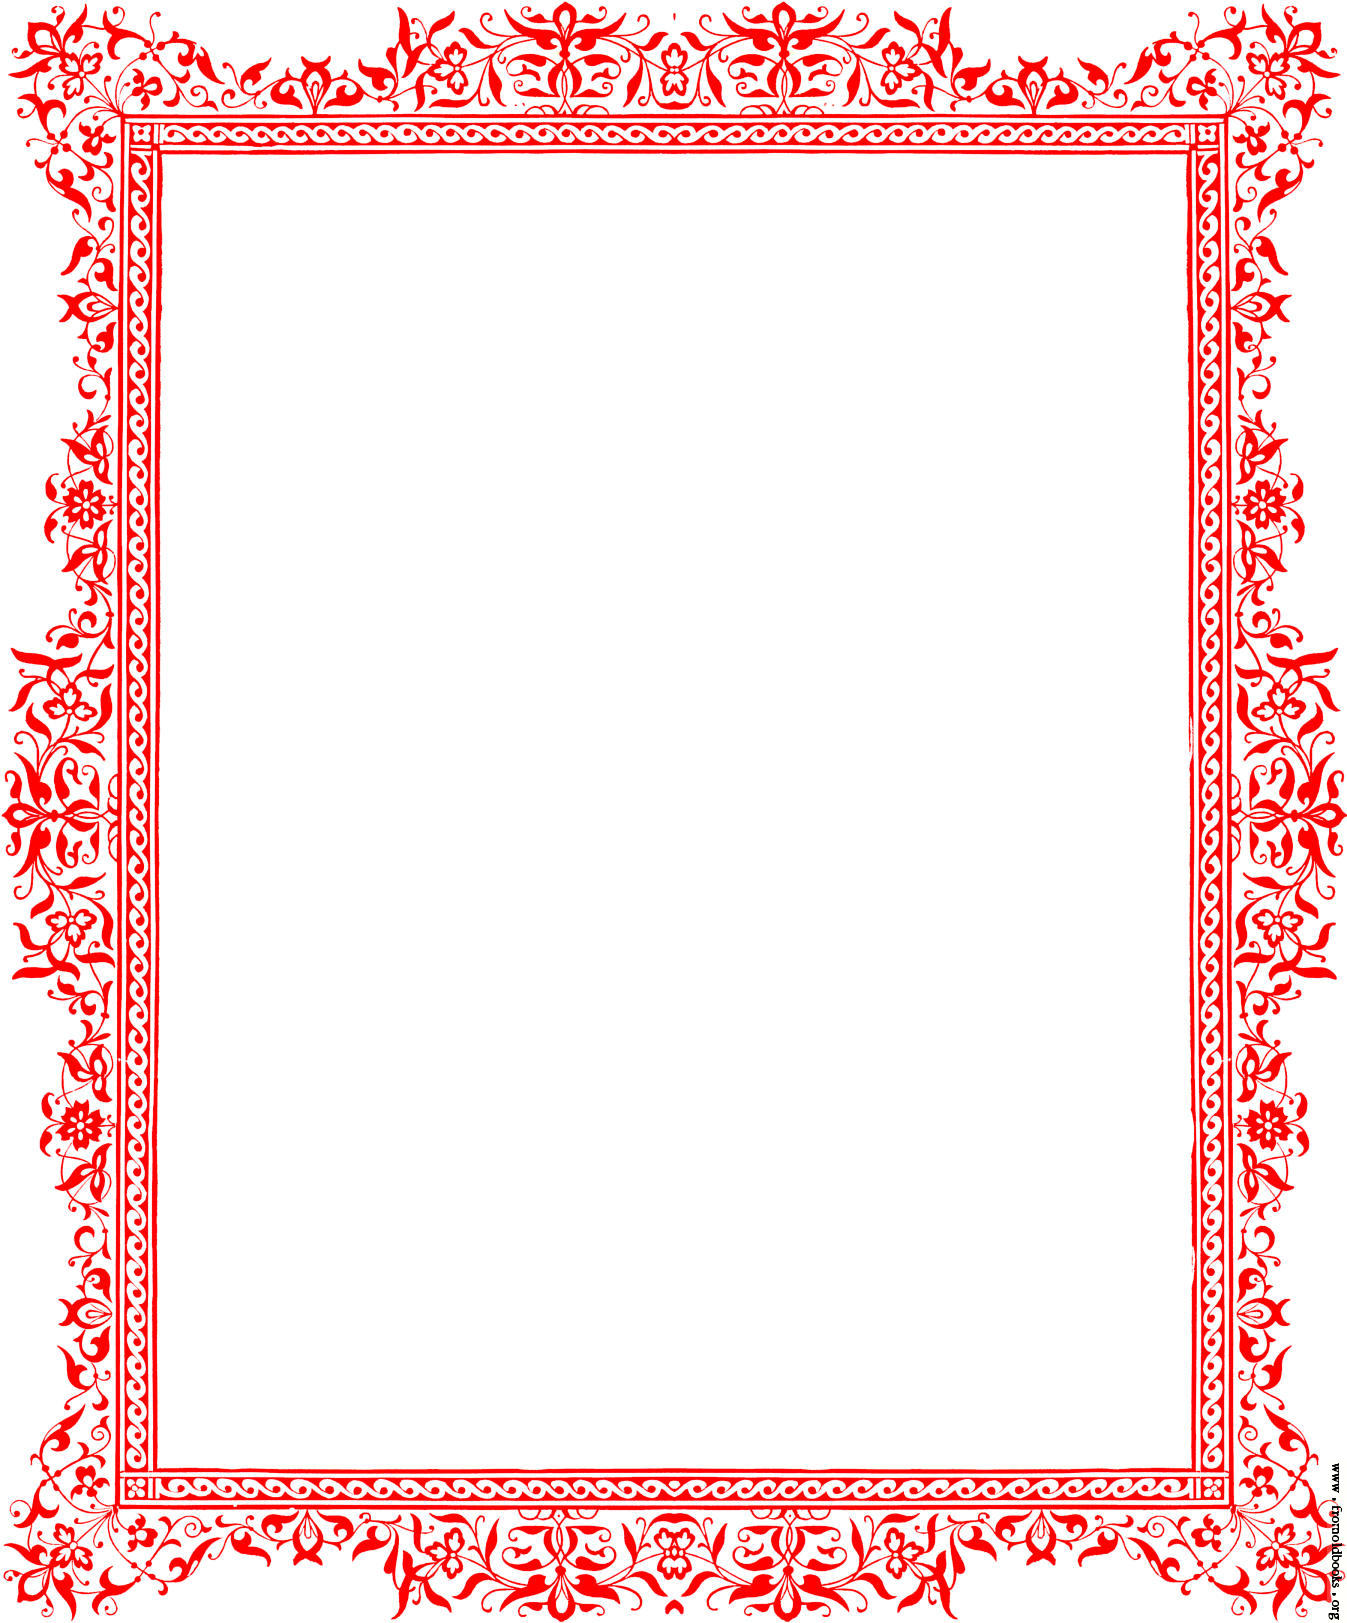 Red border from Page 27 [image 415x500 pixels]